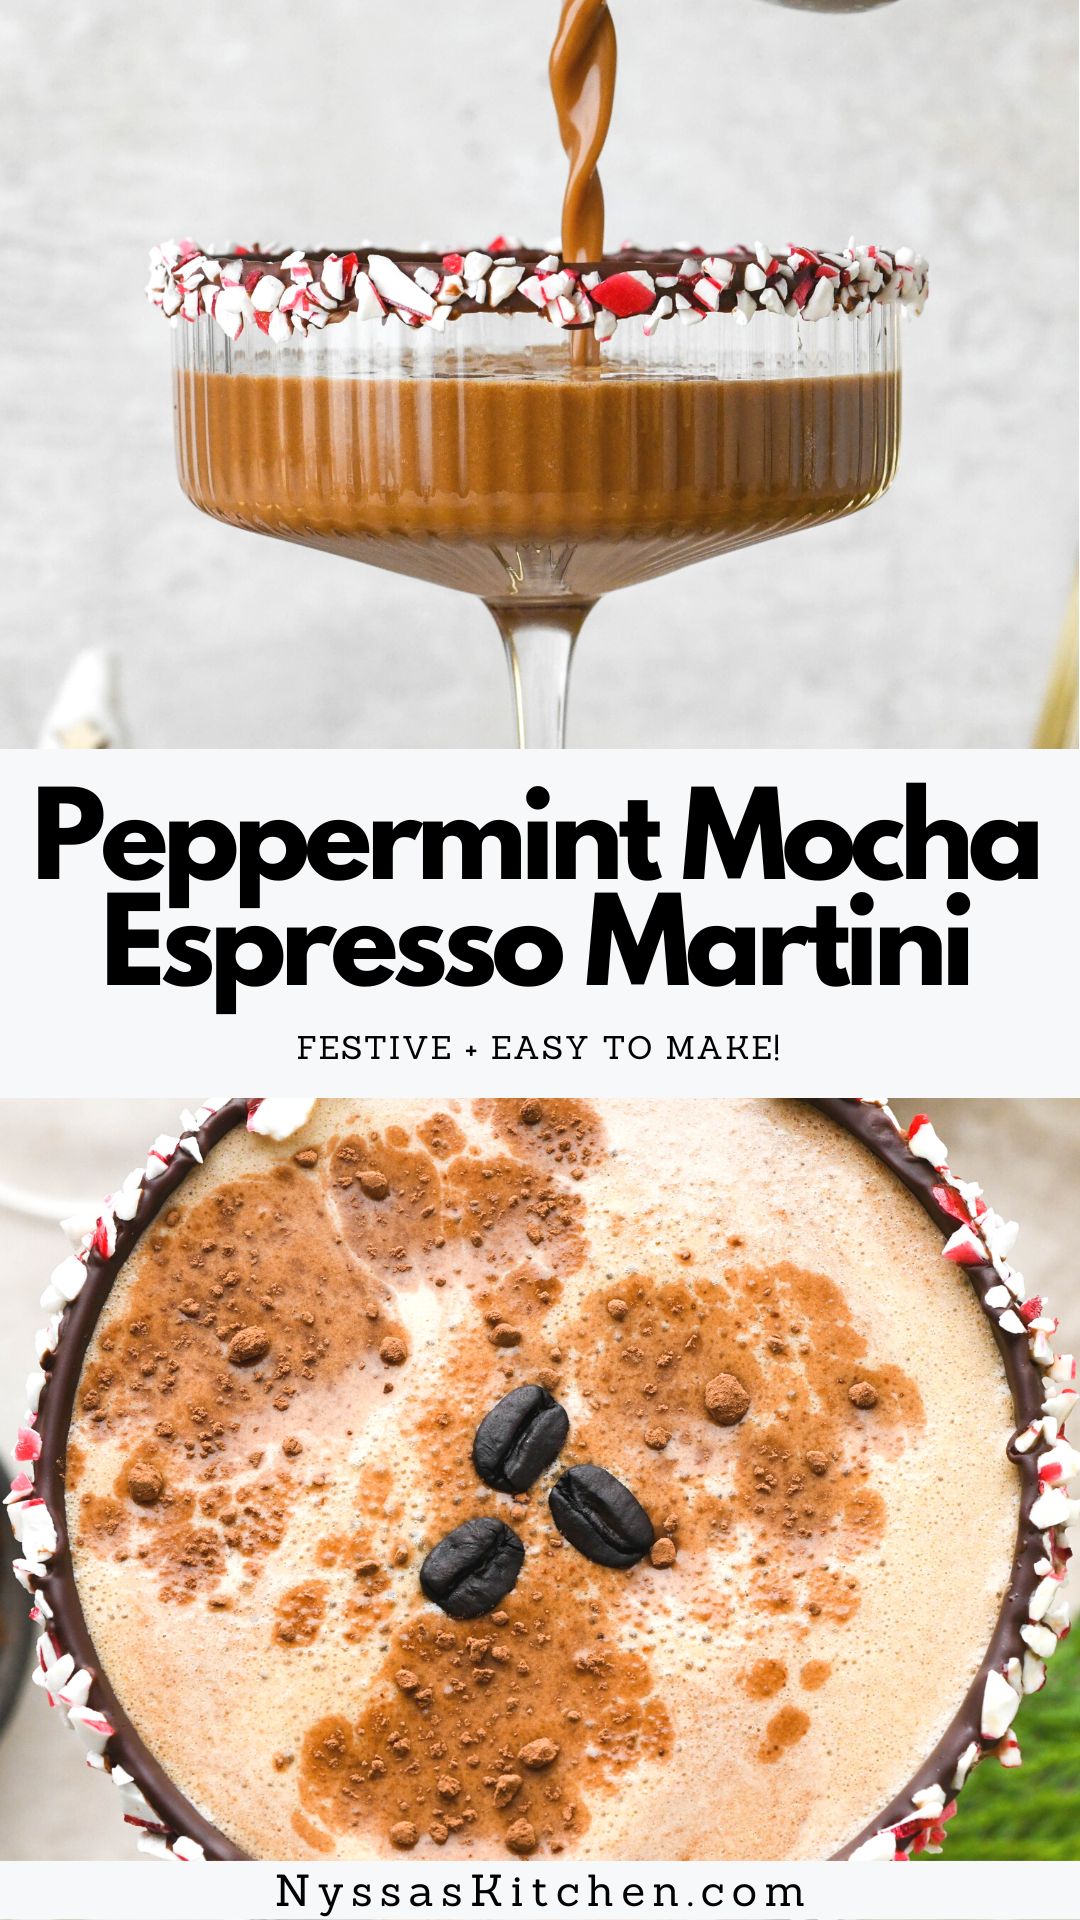 A peppermint mocha espresso martini is an easy (yet fancy!) make at home cocktail that's just perfect for the holiday season. Made with pantry staples that you likely already have on hand (no need to run to the store for any special ingredients), and simple enough that it can be whipped up in just a few minutes. Delightfully creamy, and laced with notes of chocolate and peppermint. A real treat of a drink to cozy up with throughout the winter season!